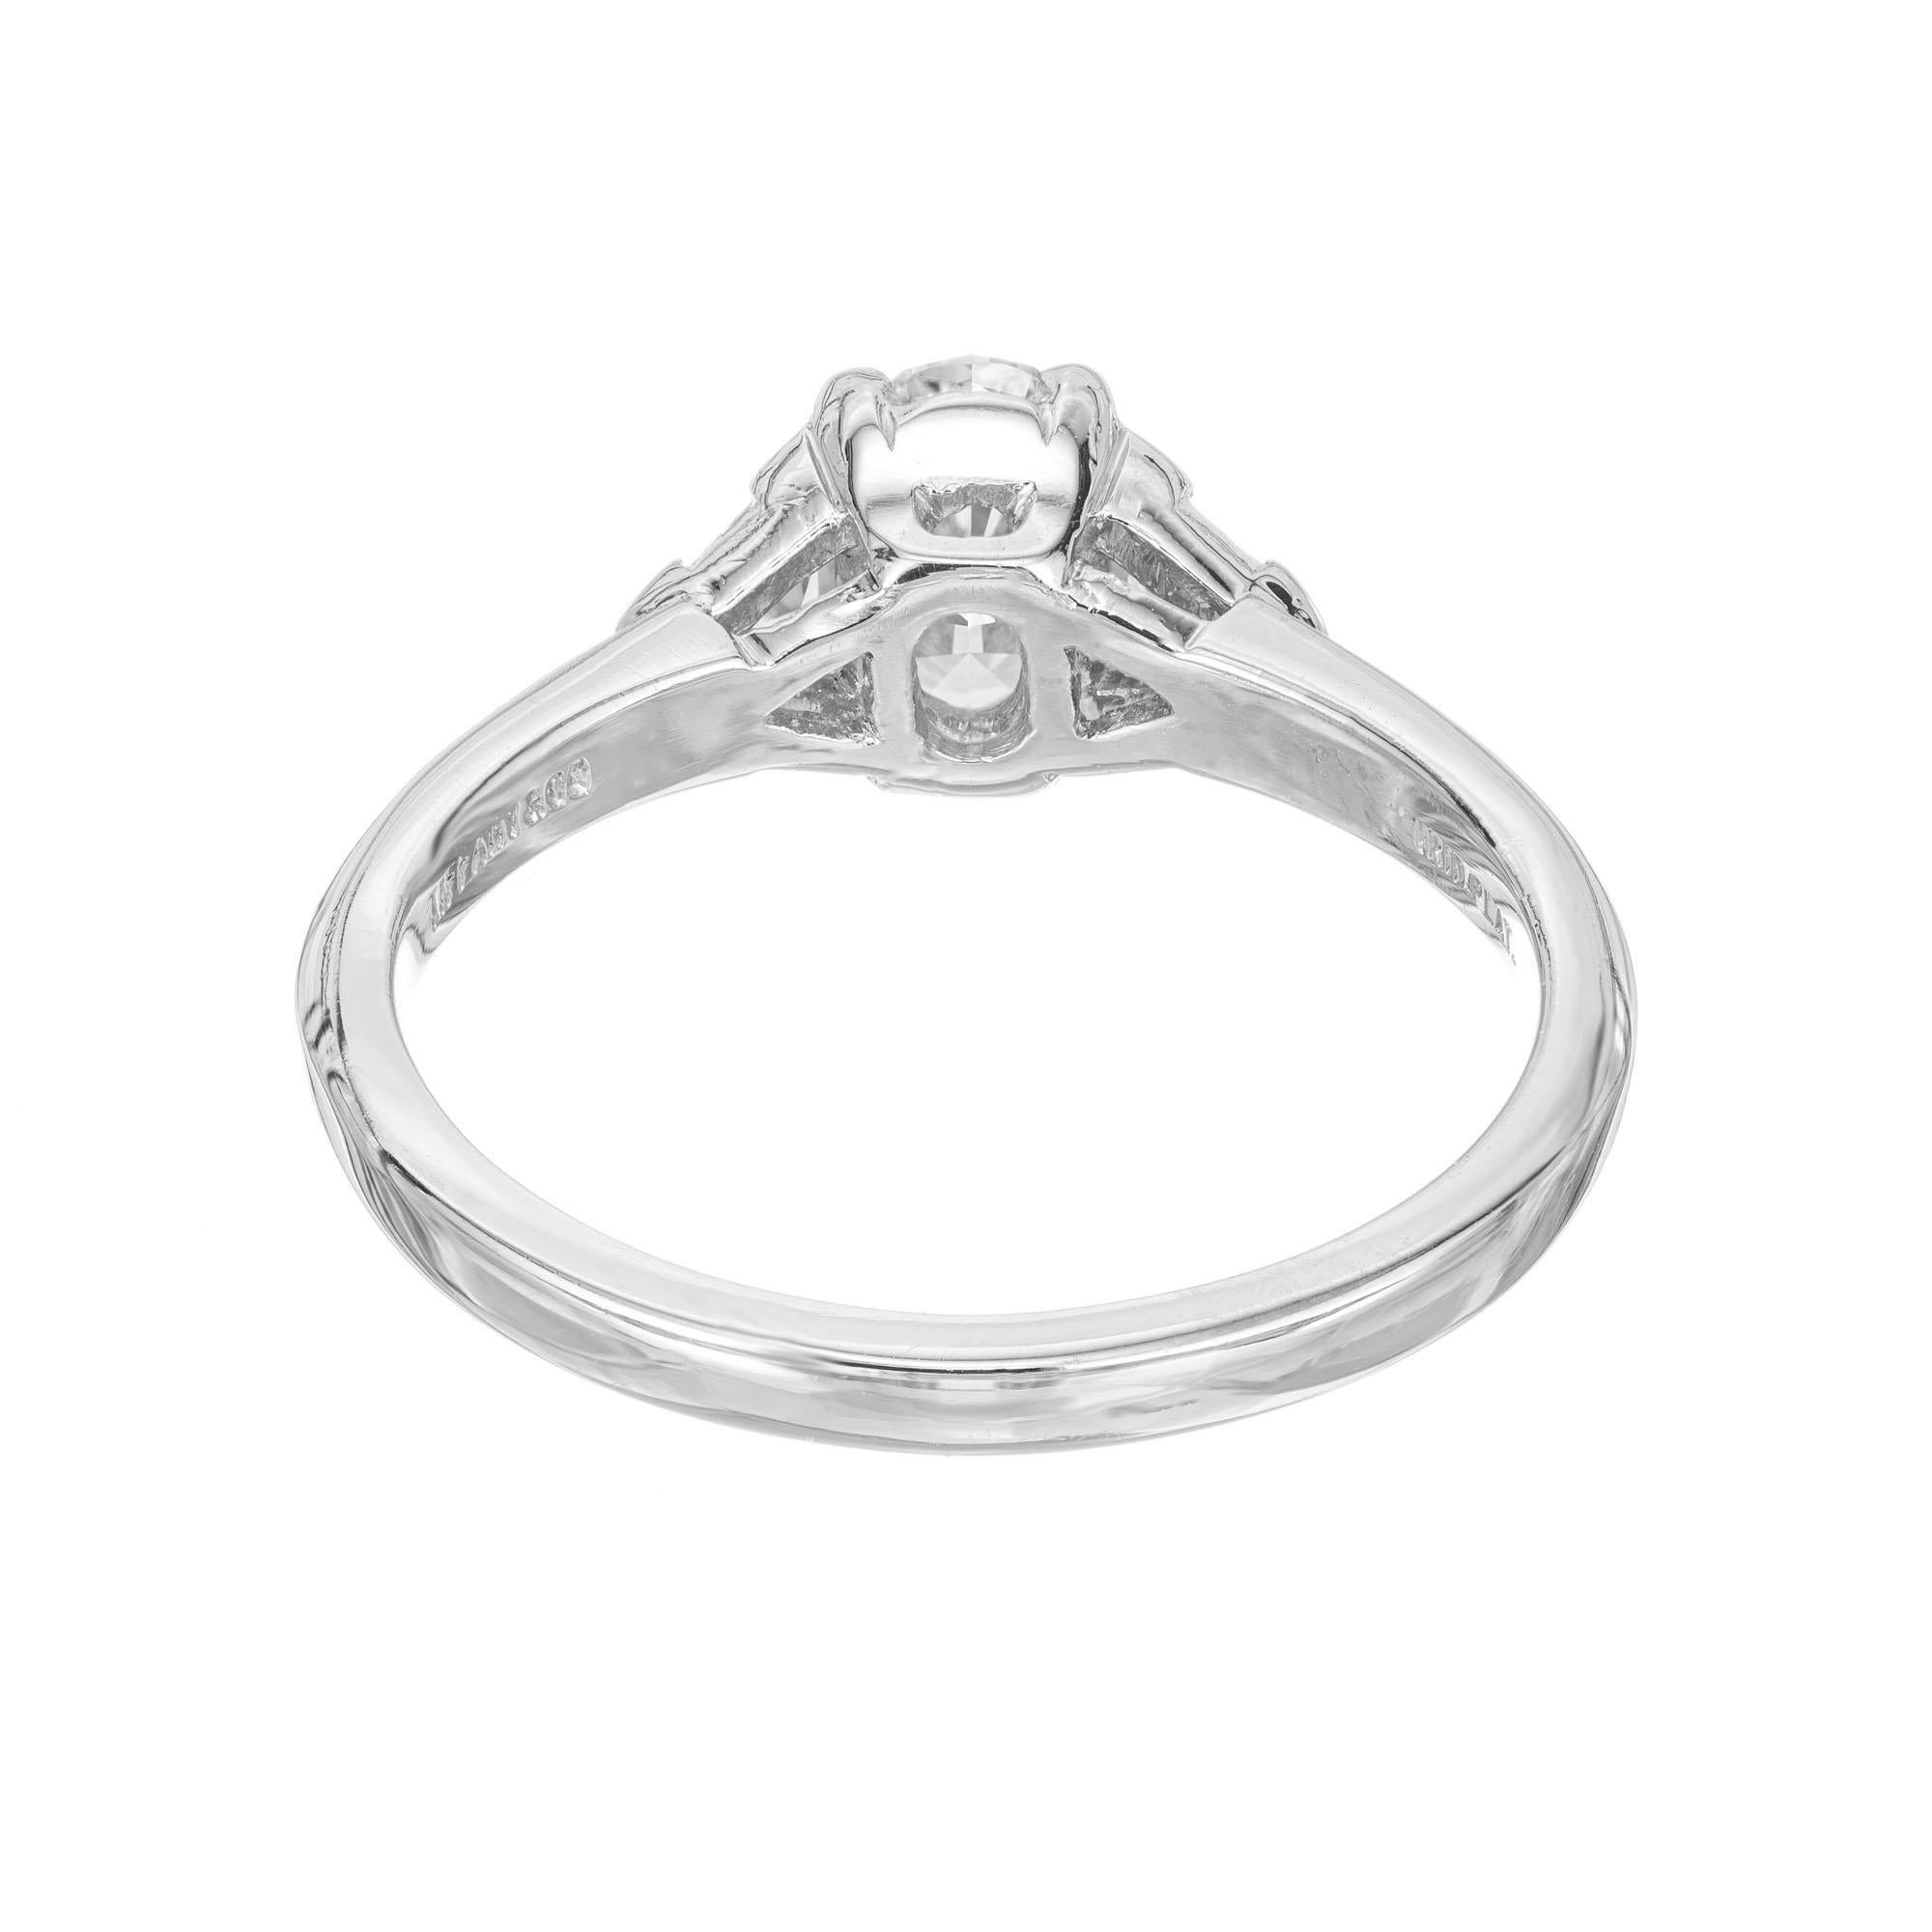 Oval Cut Tiffany & Co. GIA Certified .58 Carat Diamond Platinum Engagement Ring